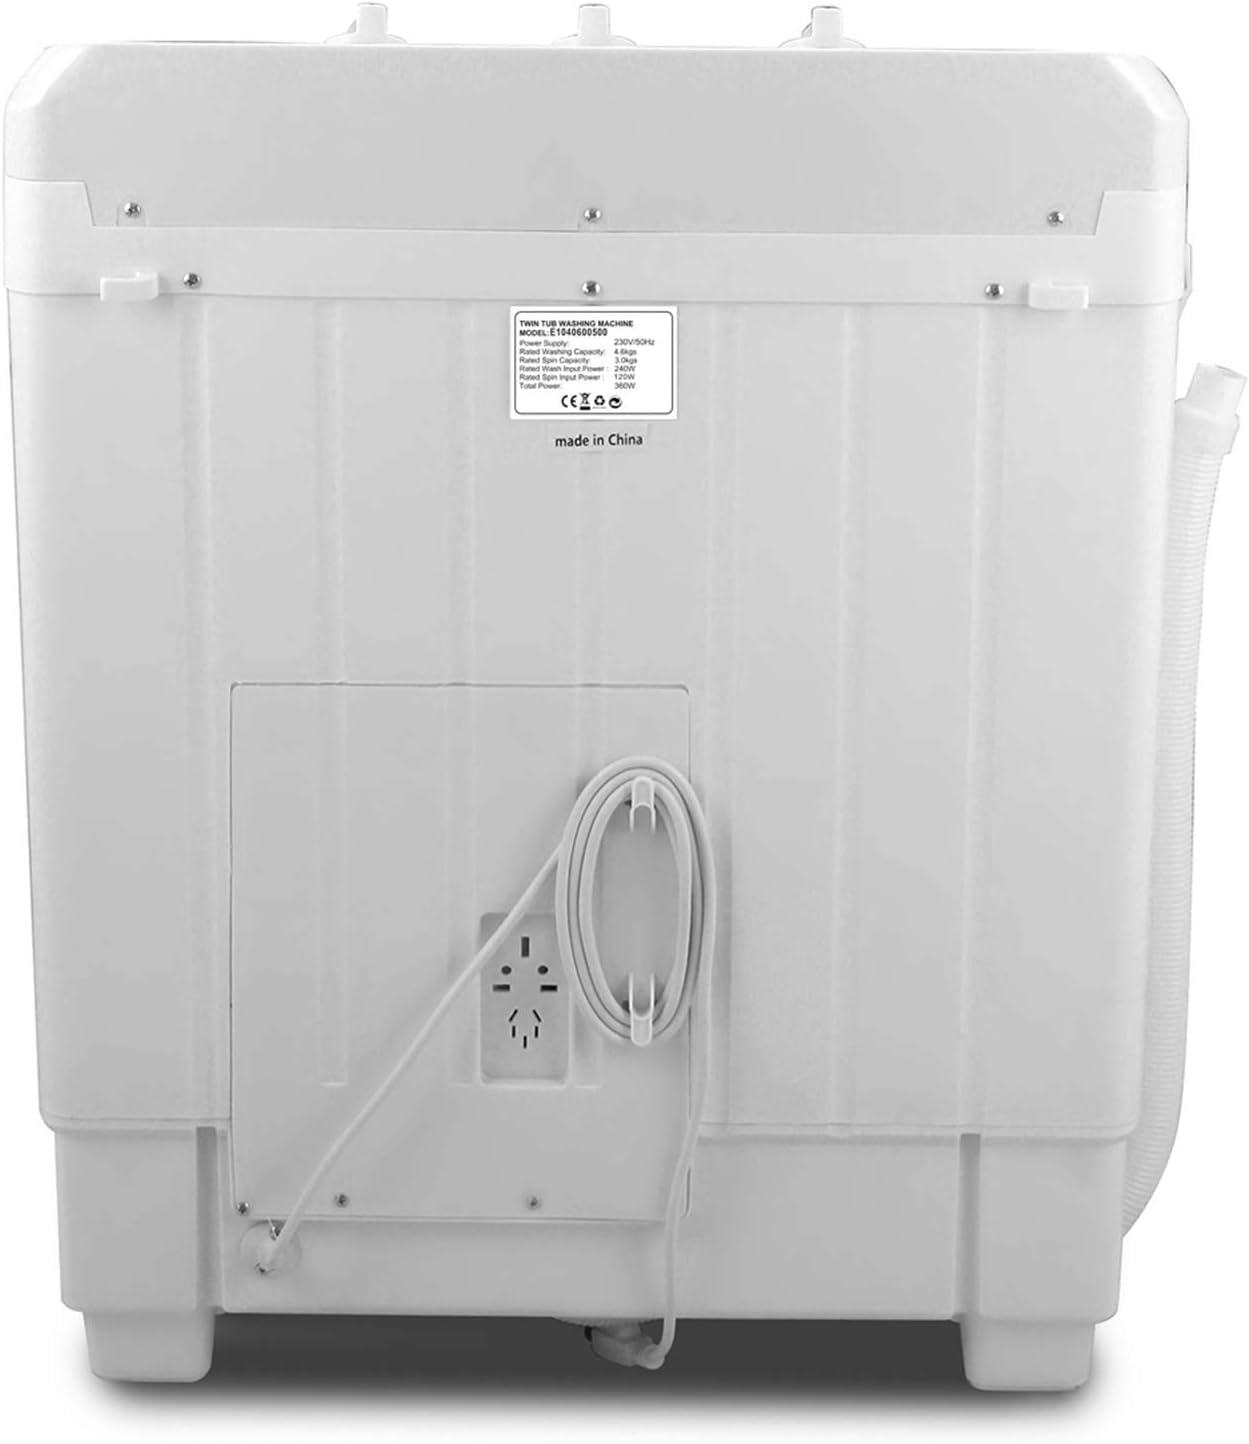 Portable Twin Tub Washing Machine 8.5 KG Total Capacity Washer And Spin Dryer Combo Compact For Camping Dorms Apartments College Rooms 6.5KG Washer 2 KG Drying Black&White - Amazing Gadgets Outlet